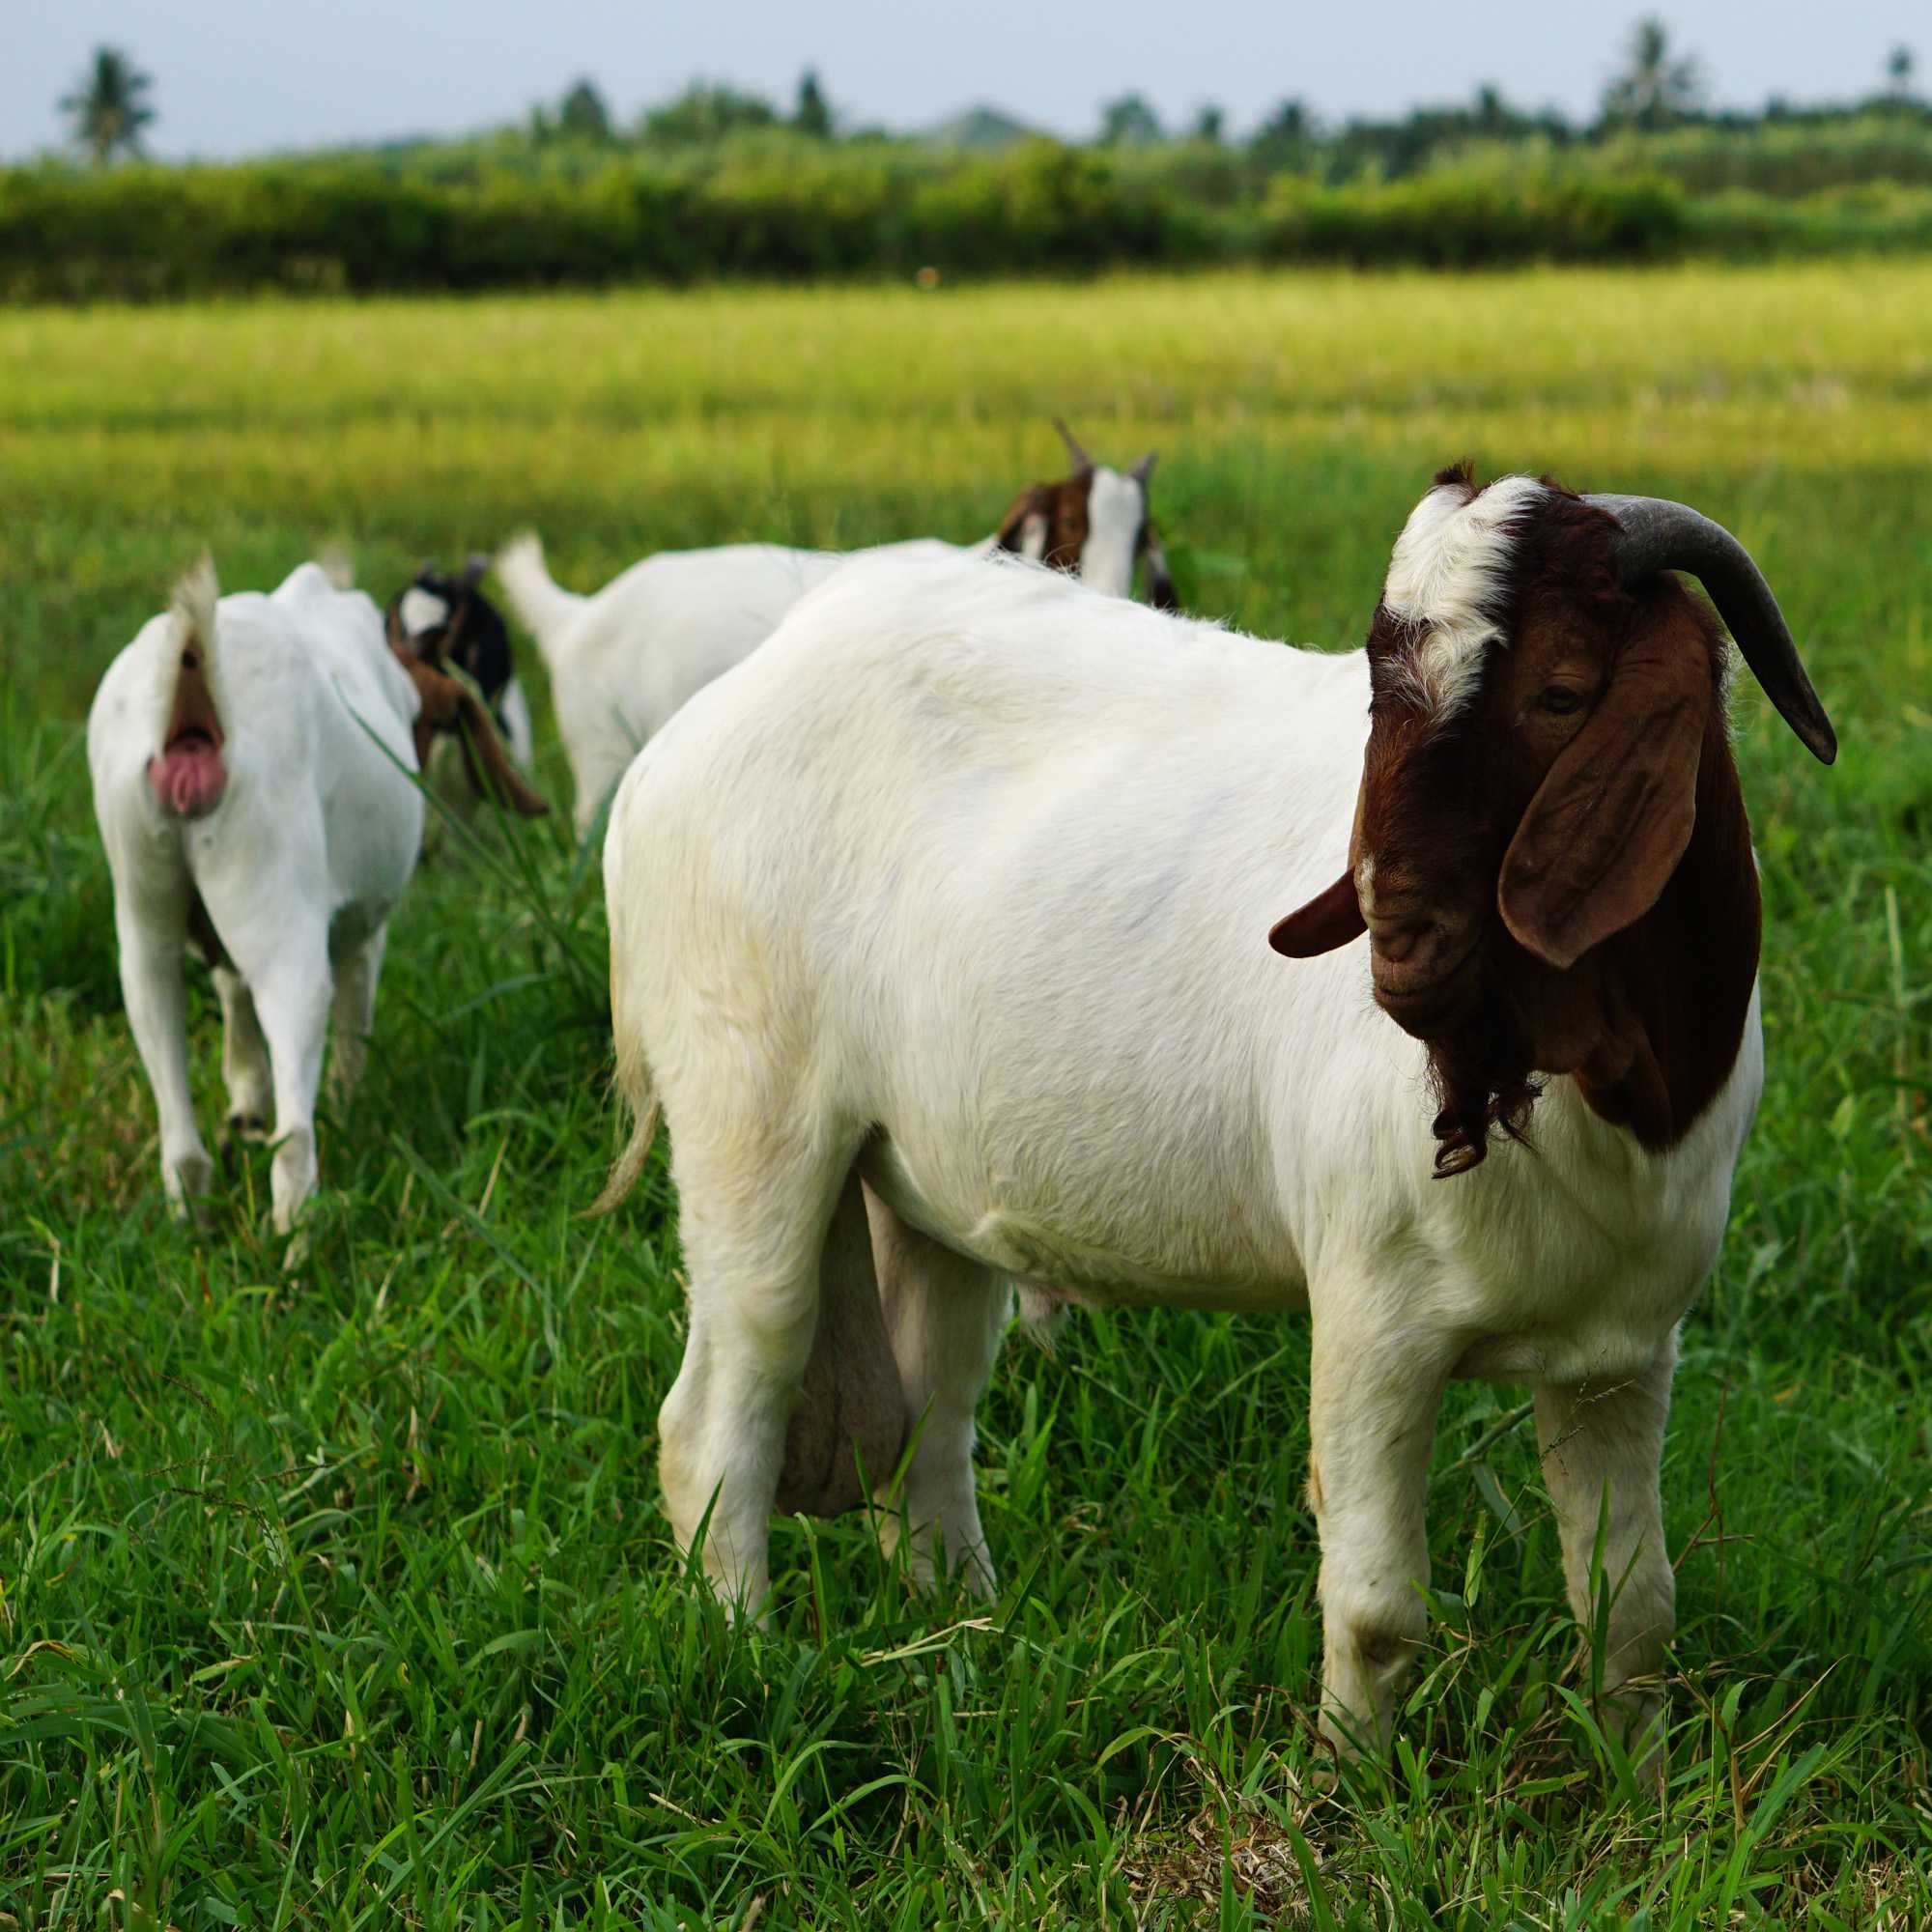 Goat Pasture Seed